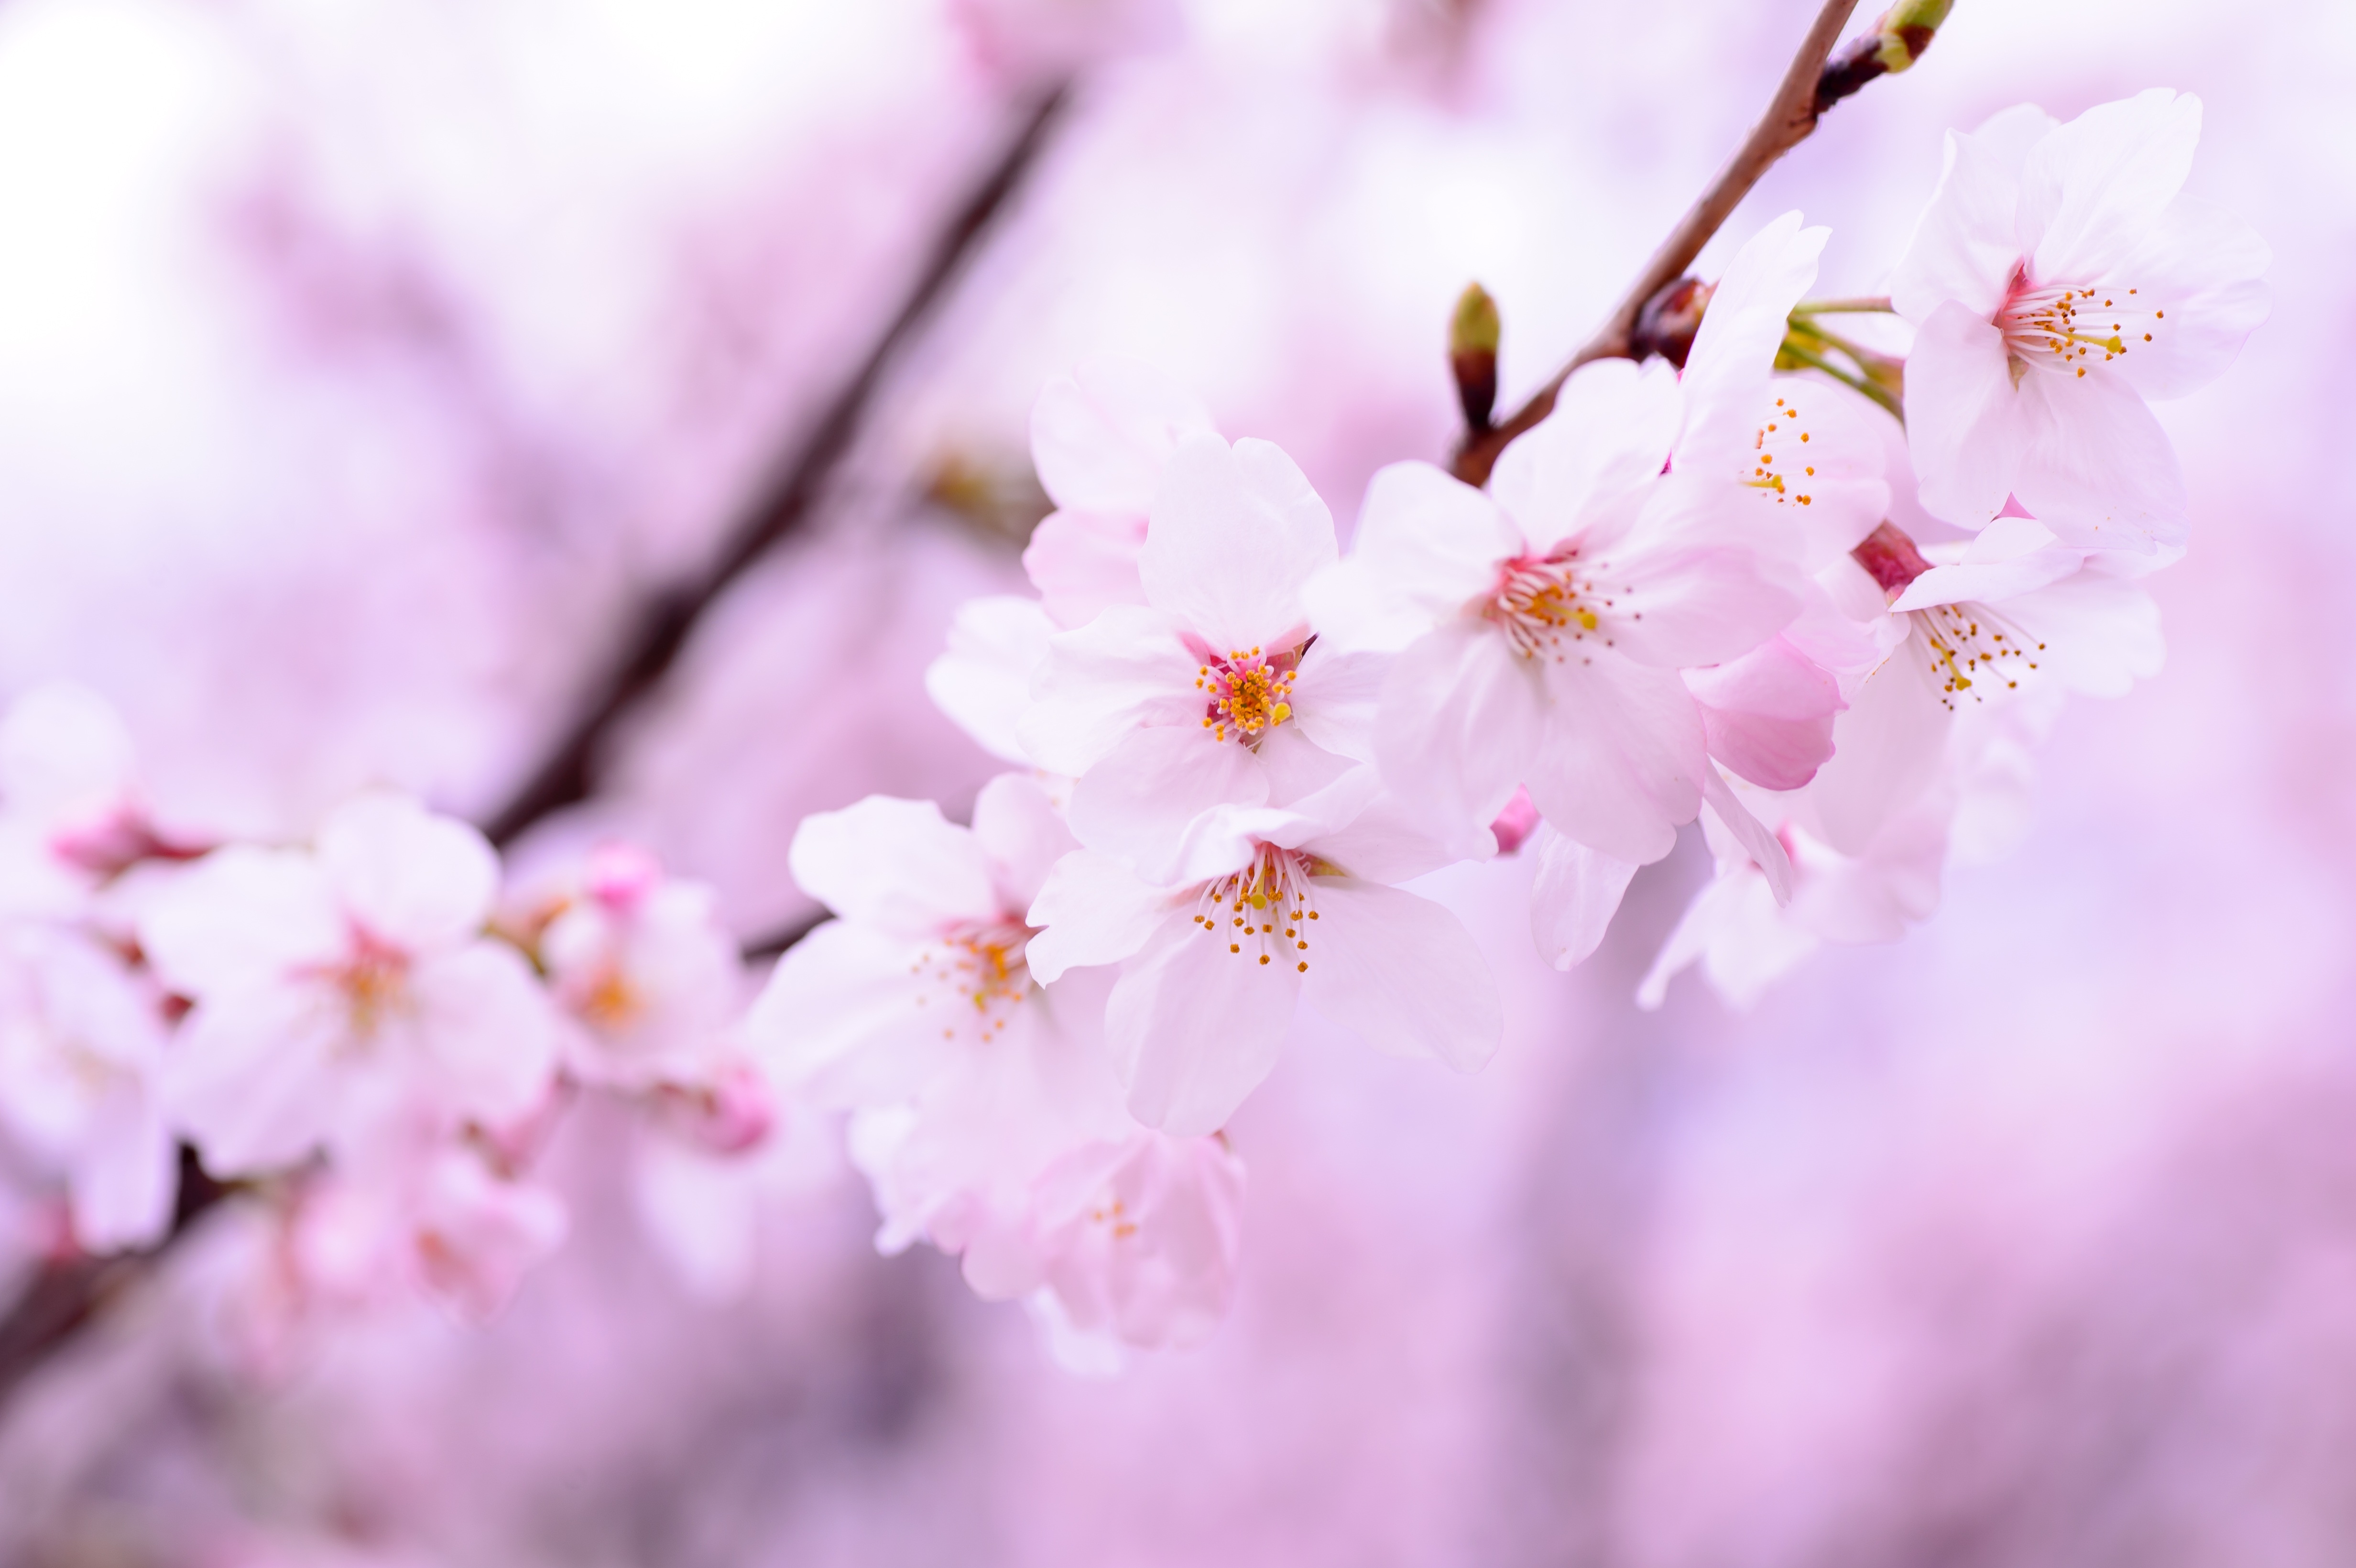 HD wallpaper, 5K, Pink Flowers, Cherry Flowers, Cherry Blossom, Pink Background, Spring